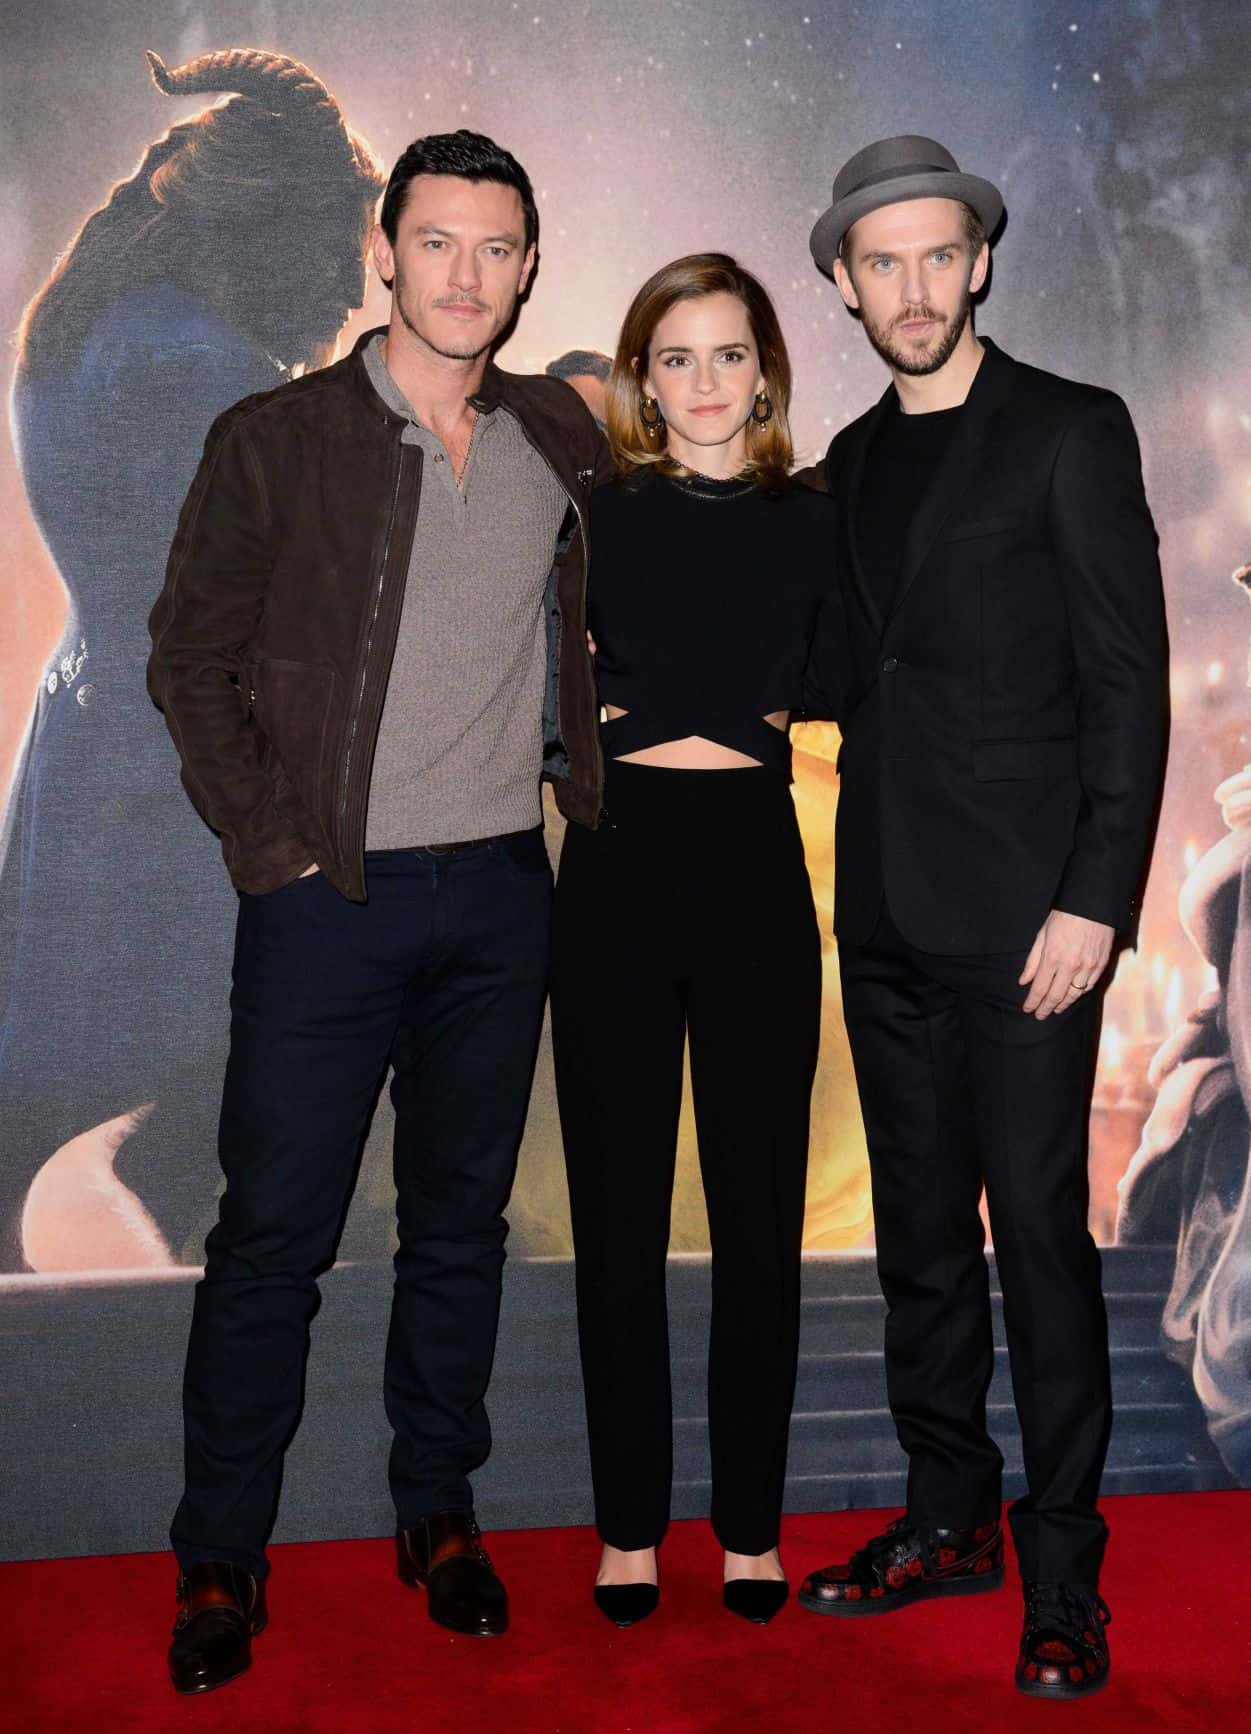 Emma Watson Was Spectacular at the "Beauty And The Beast" Photocall